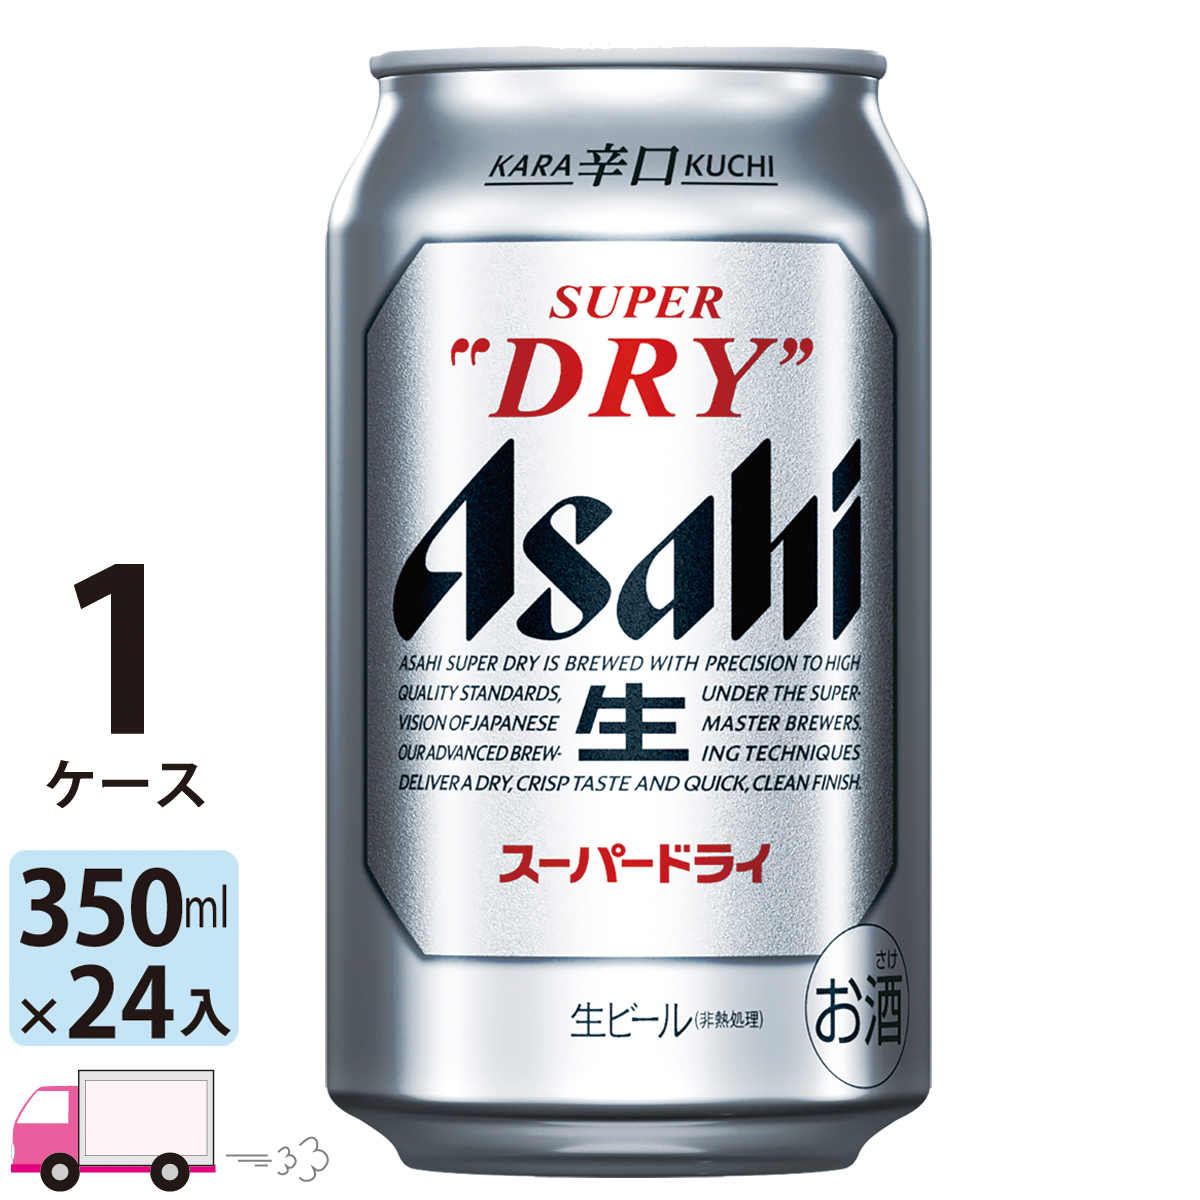  Asahi super dry 350ml can 24ps.@1 case free shipping ( one part region excepting )